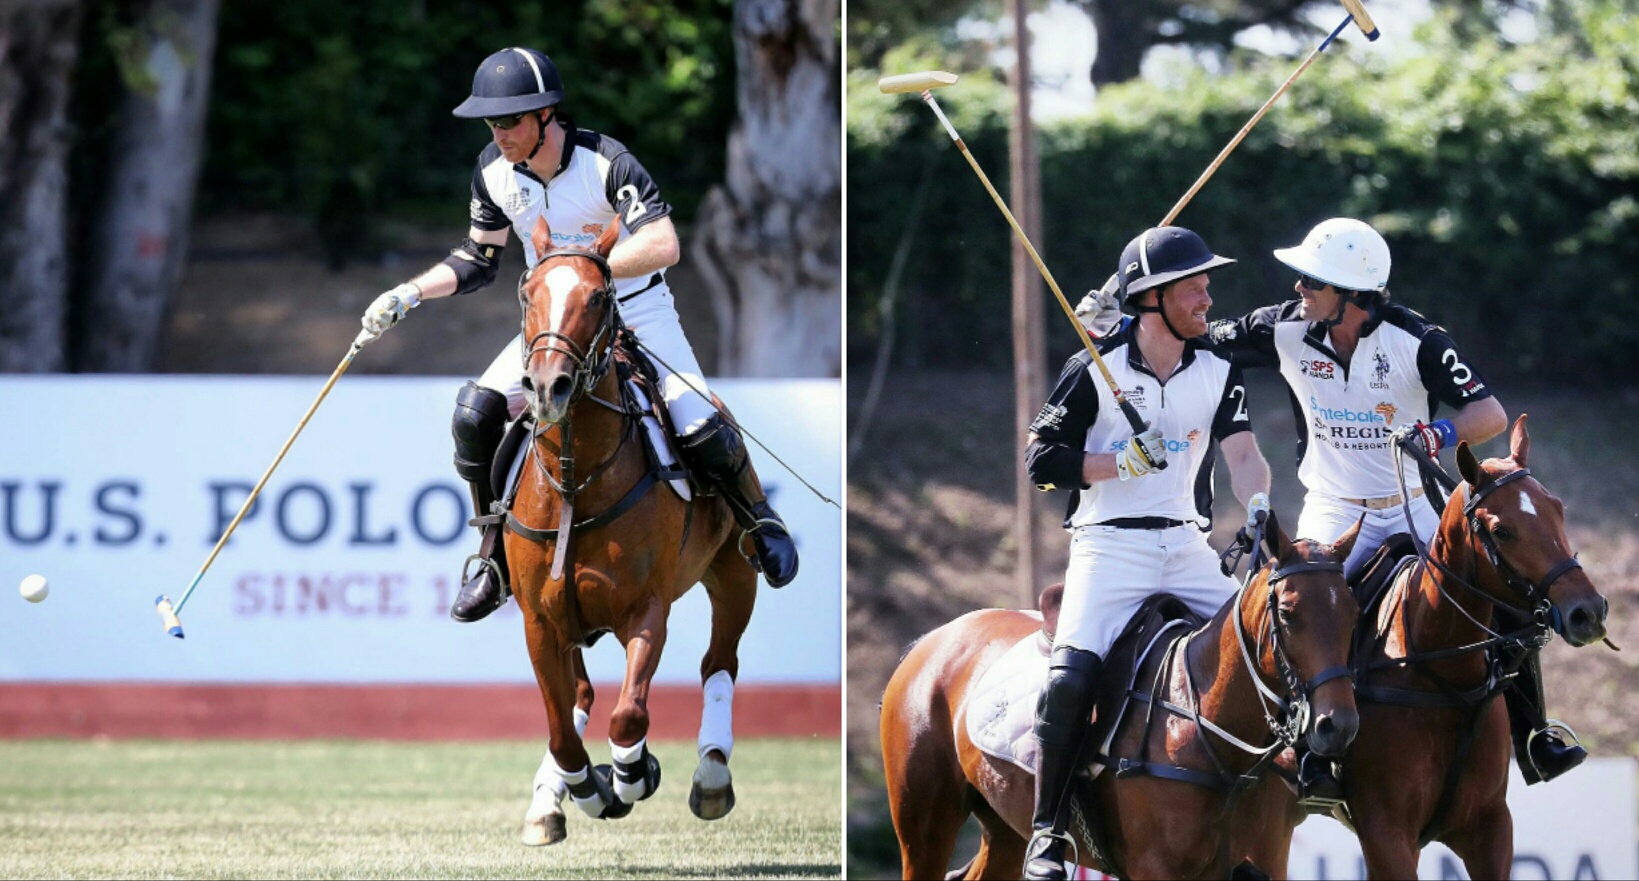 You are currently viewing Sentebale Polo Cup in Rome 2019